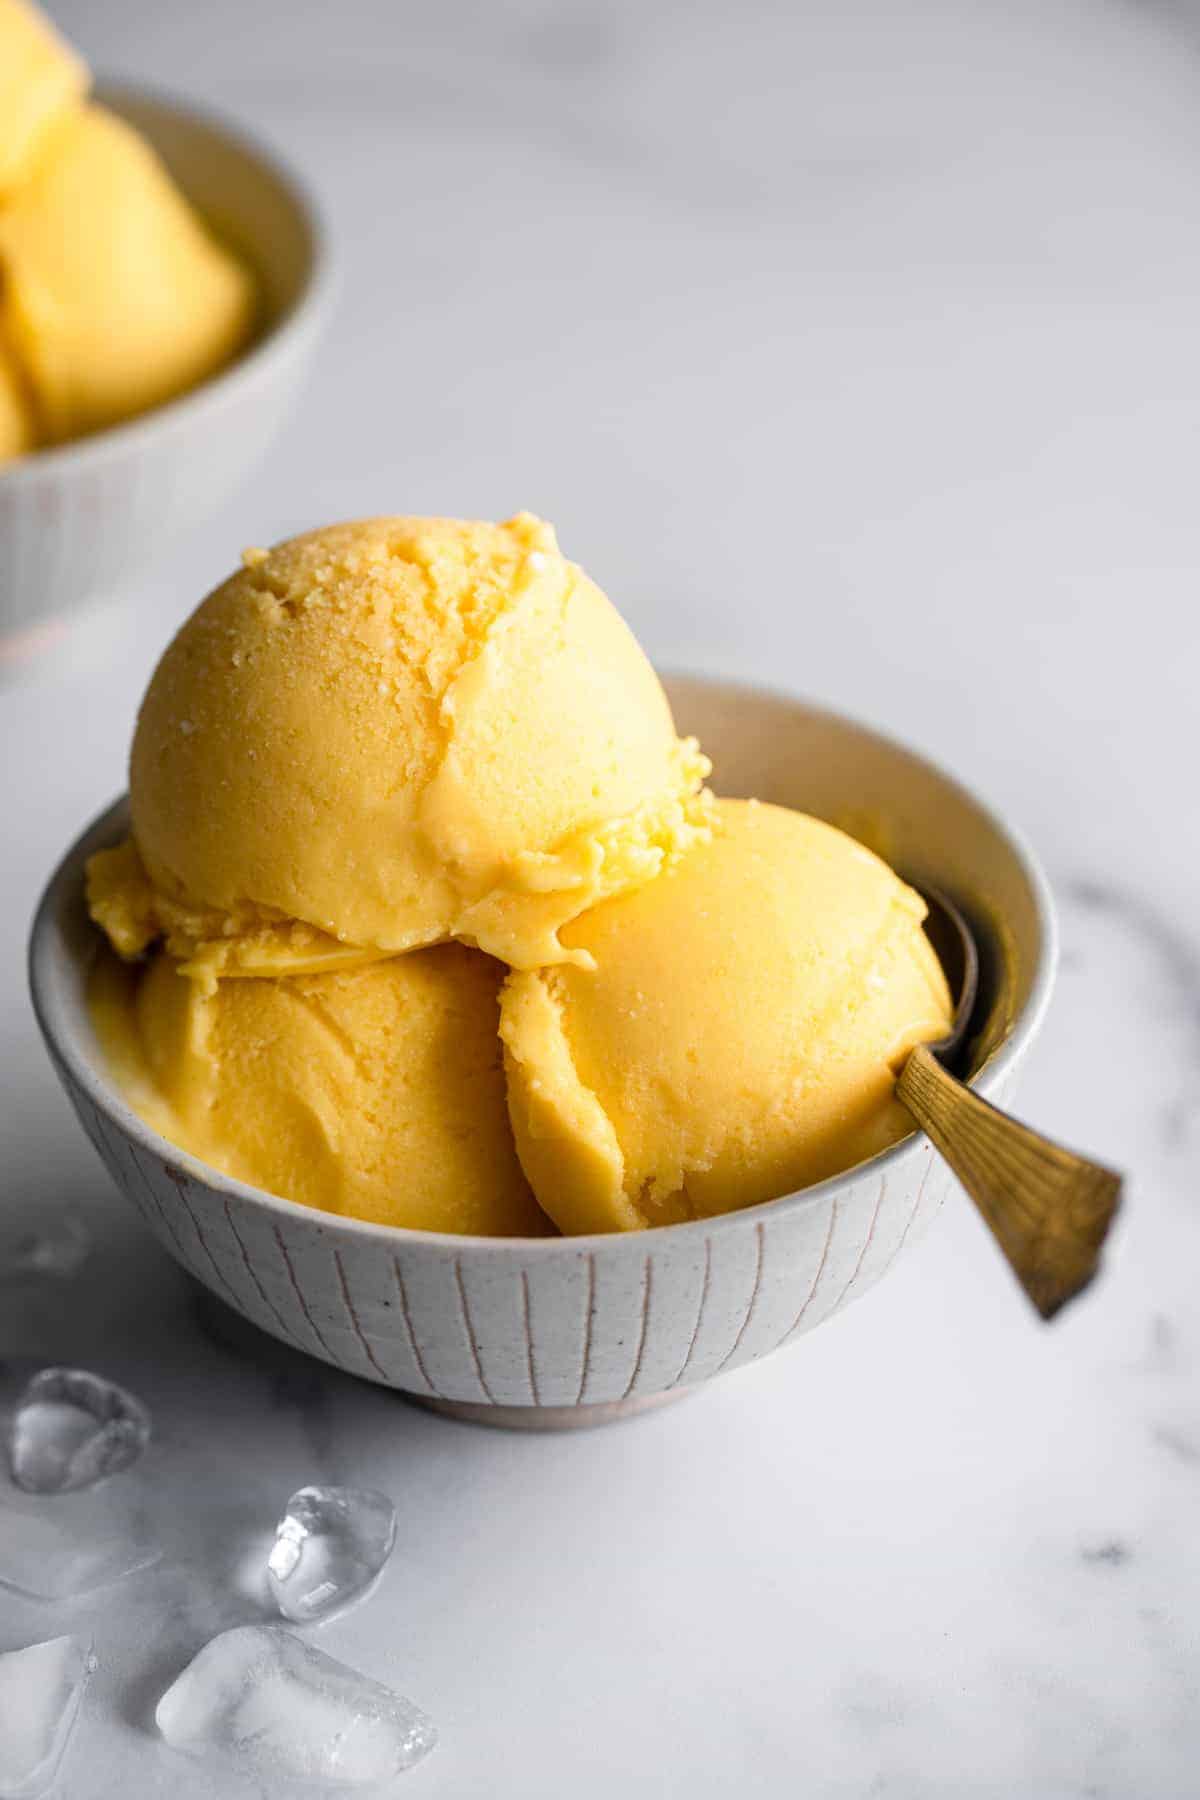 Mango frozen yogurt close up picture in a bowl with a spoon